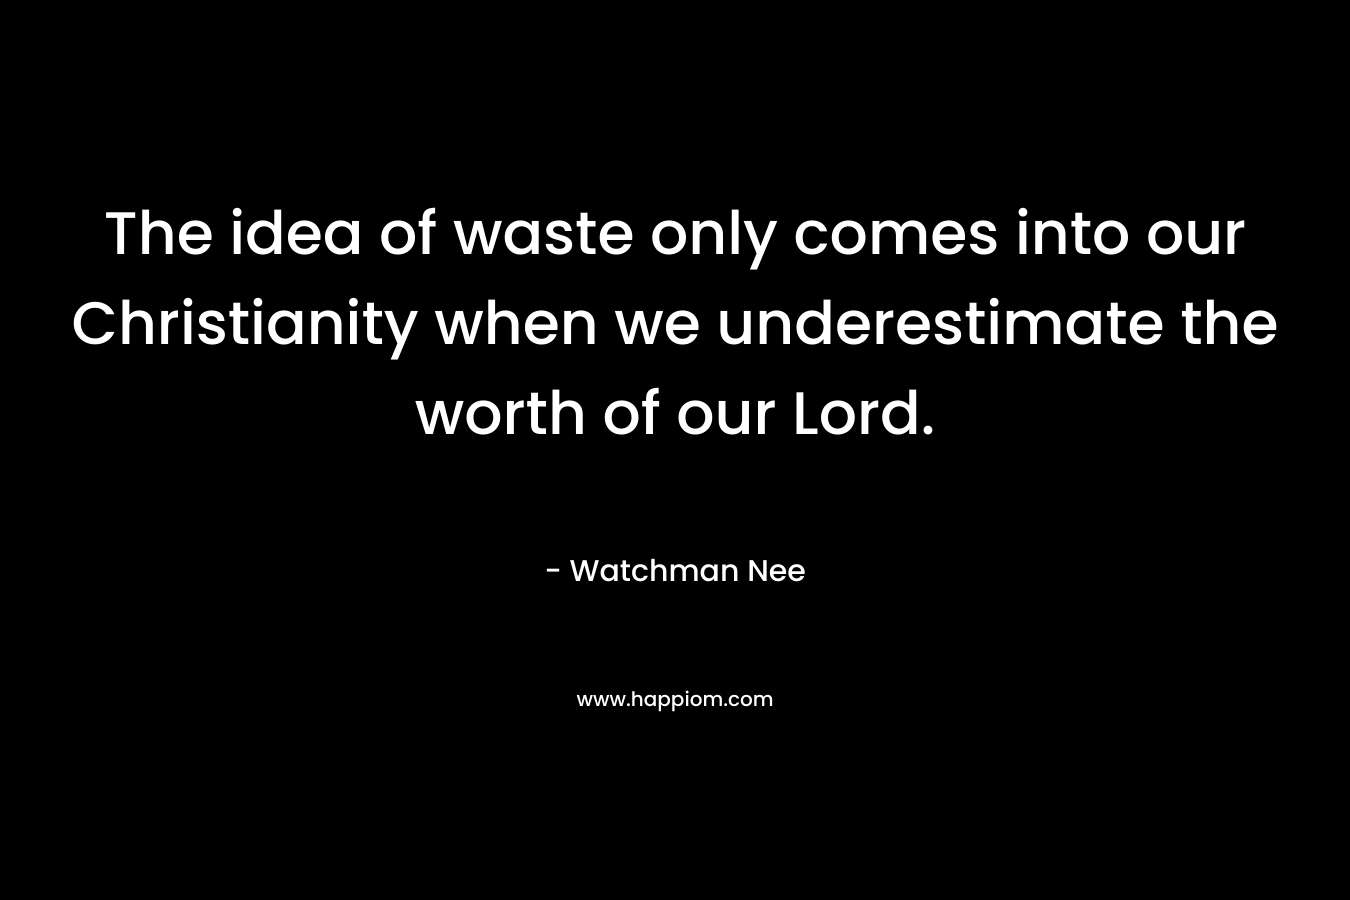 The idea of waste only comes into our Christianity when we underestimate the worth of our Lord.